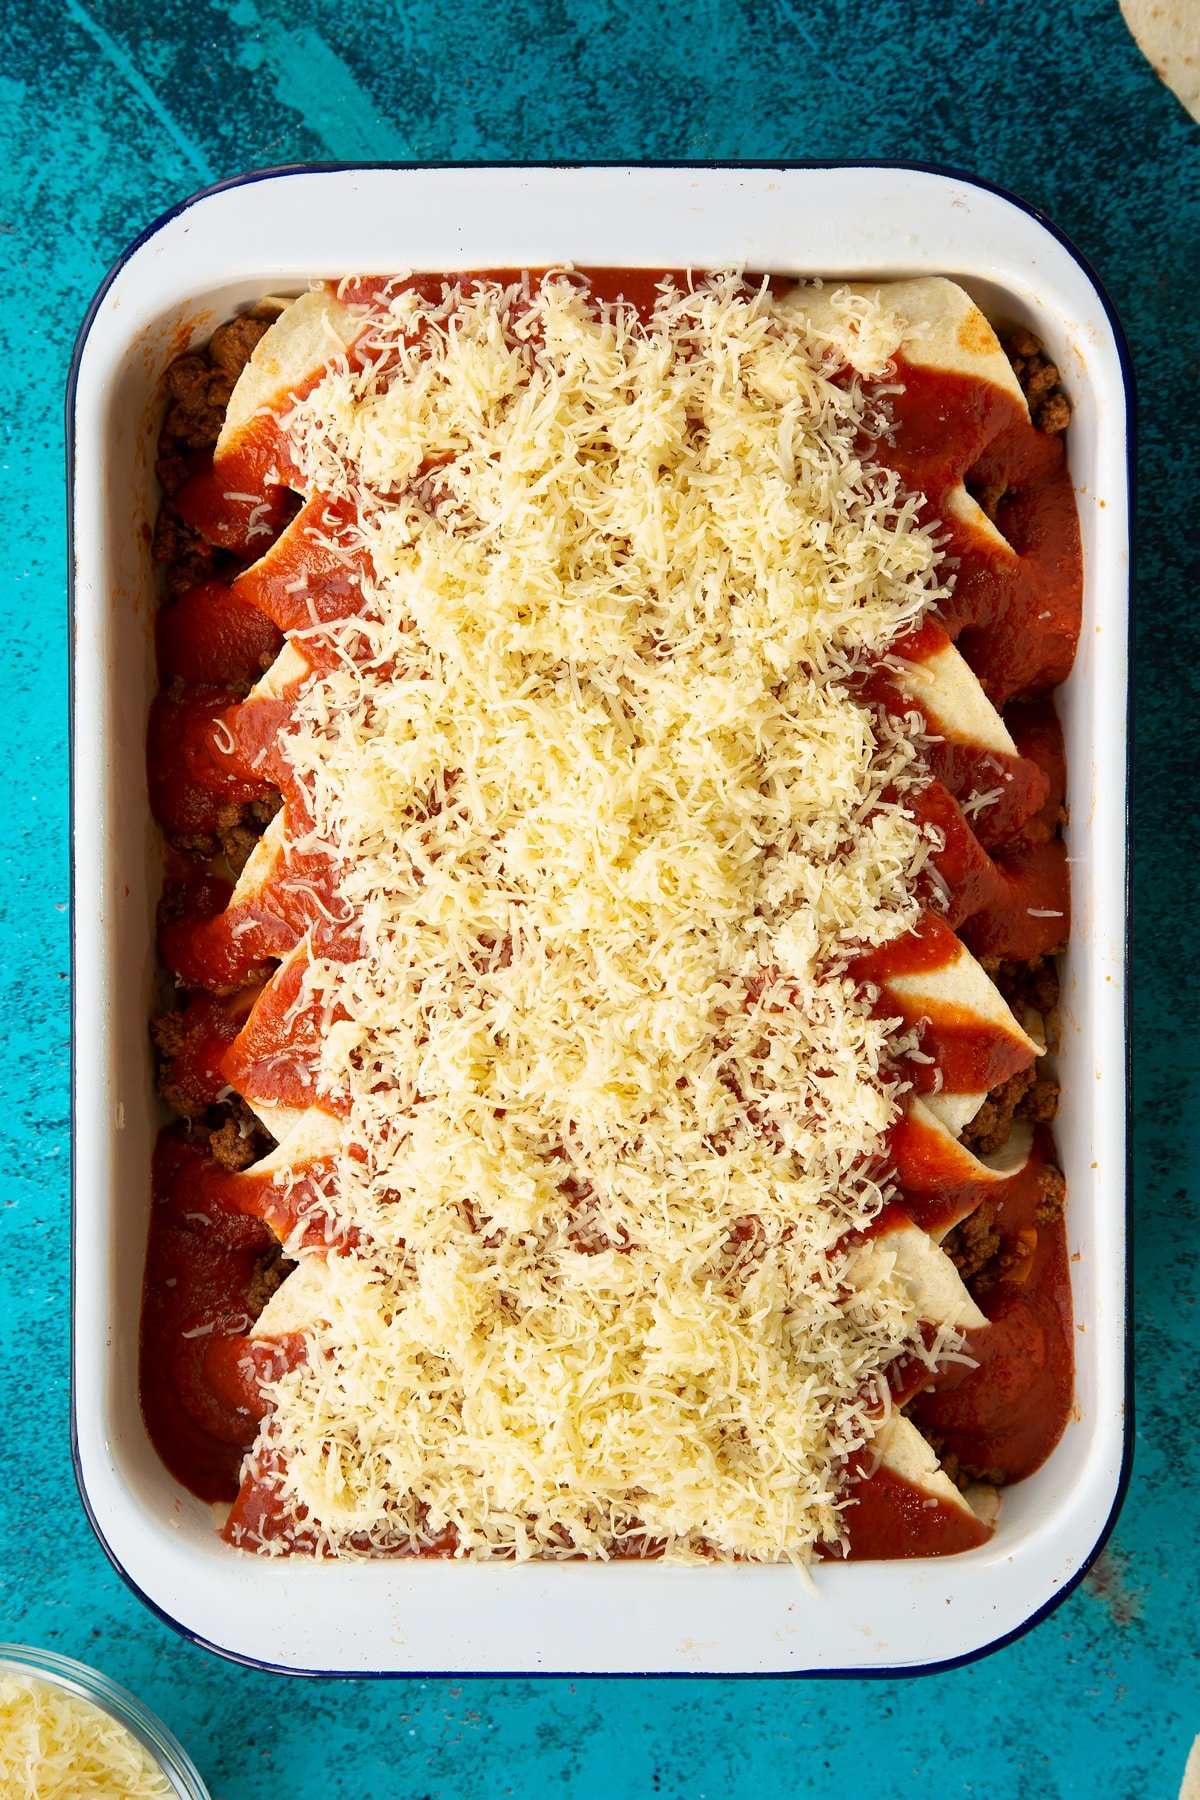 A tray of tortillas filled with Quorn mince enchilada filling, with enchilada sauce and cheese on top.